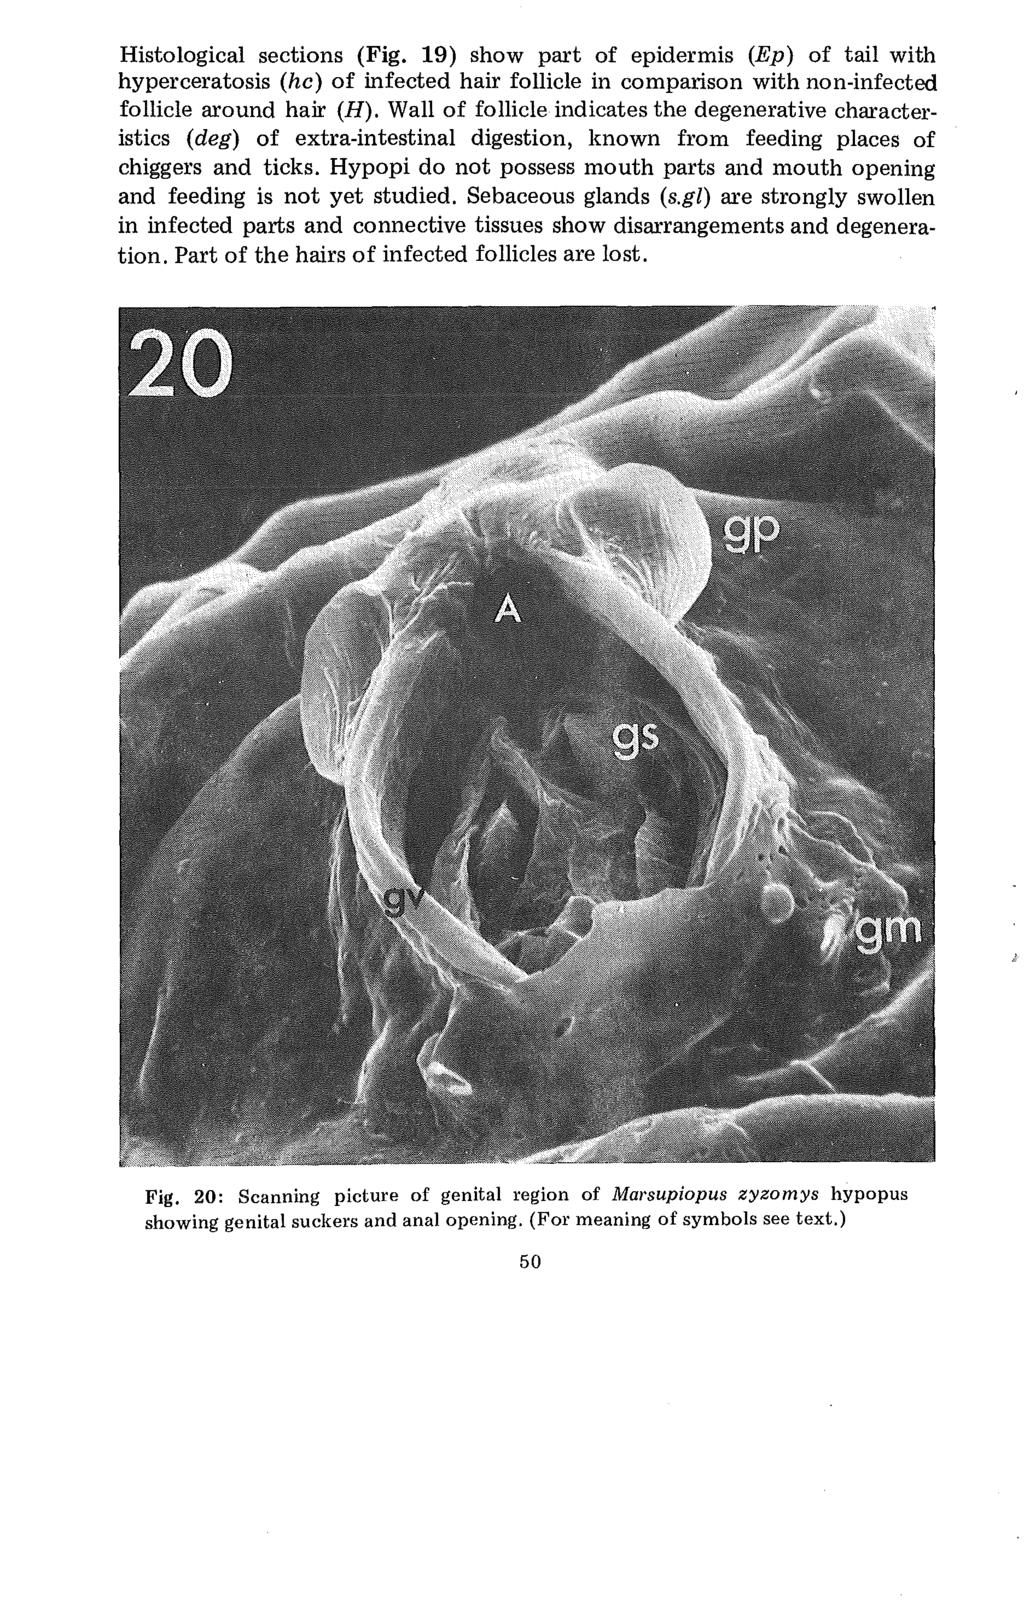 Histological sections (Fig. 19) show part of epidermis (Ep) of tail with hyperceratosis (he) of infected hair follicle in comparison with non-infected follicle around hair (H).